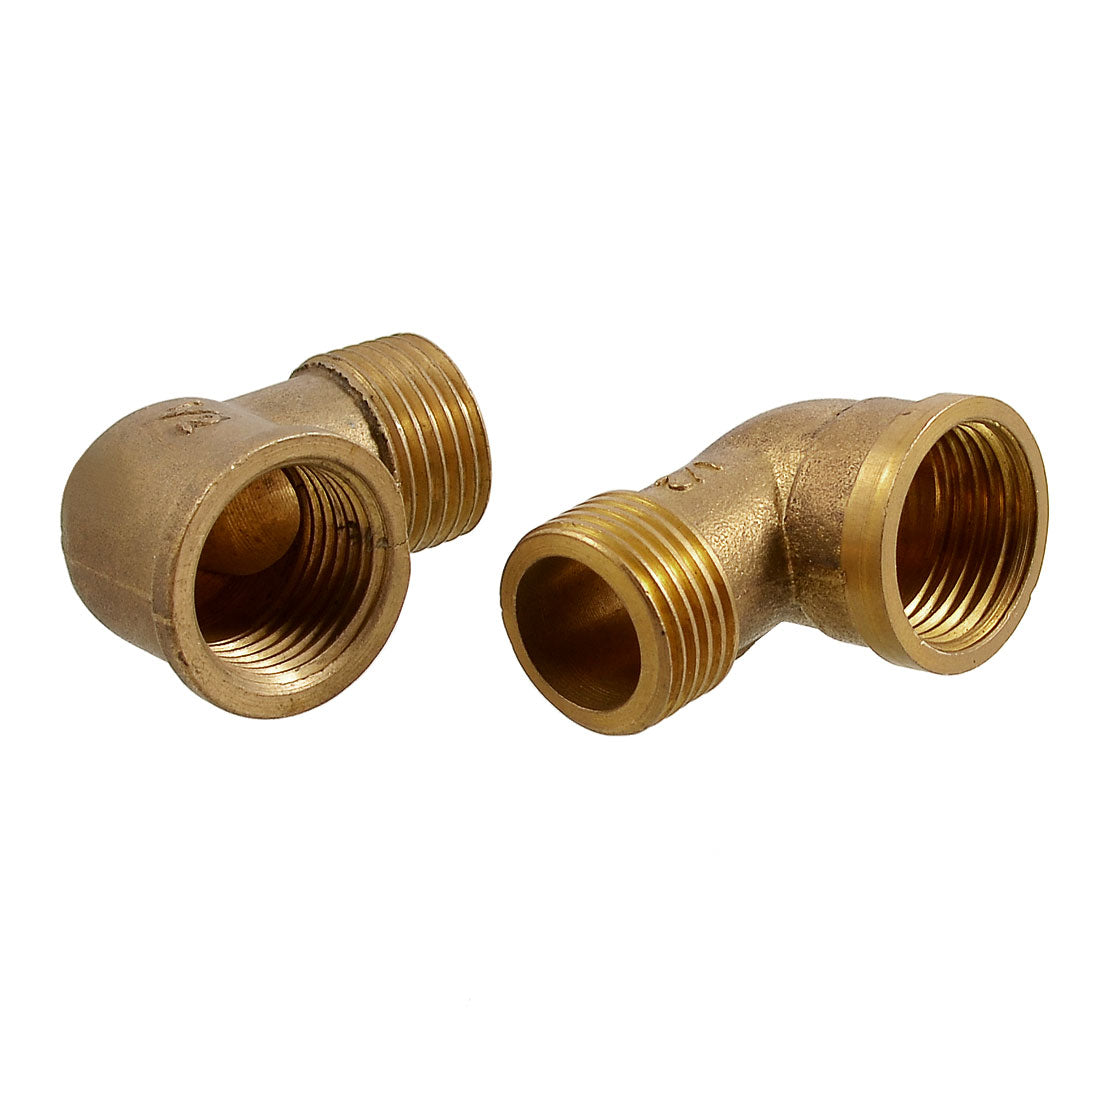 uxcell Uxcell 2 Pcs 1/2" Thread Male to Female Pipe Coupling Right Angle Connectors